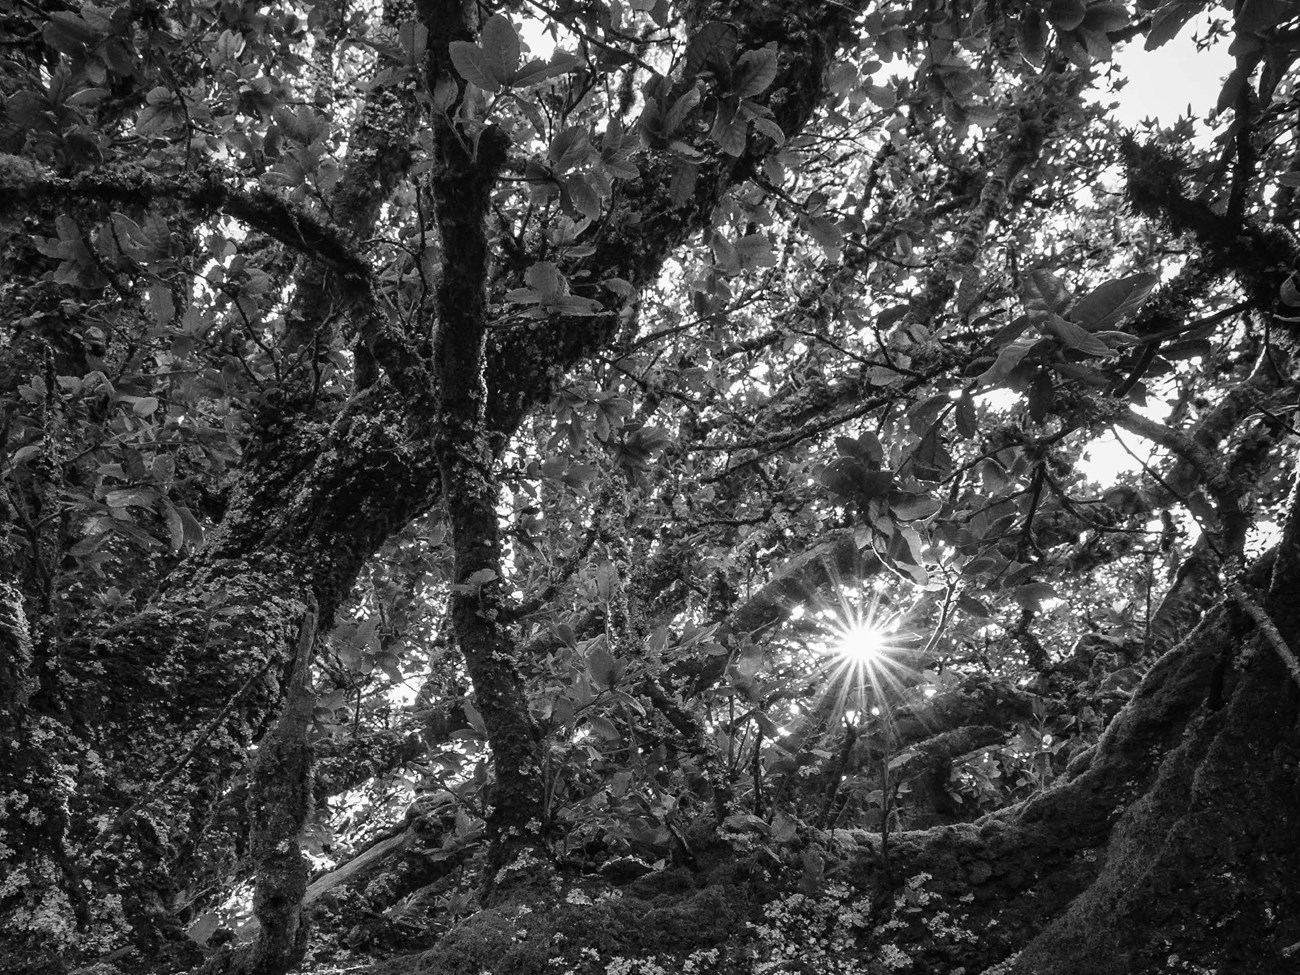 Dramatic black and white image of a sun star viewed through twisting, lichen-covered branches of an oak tree.